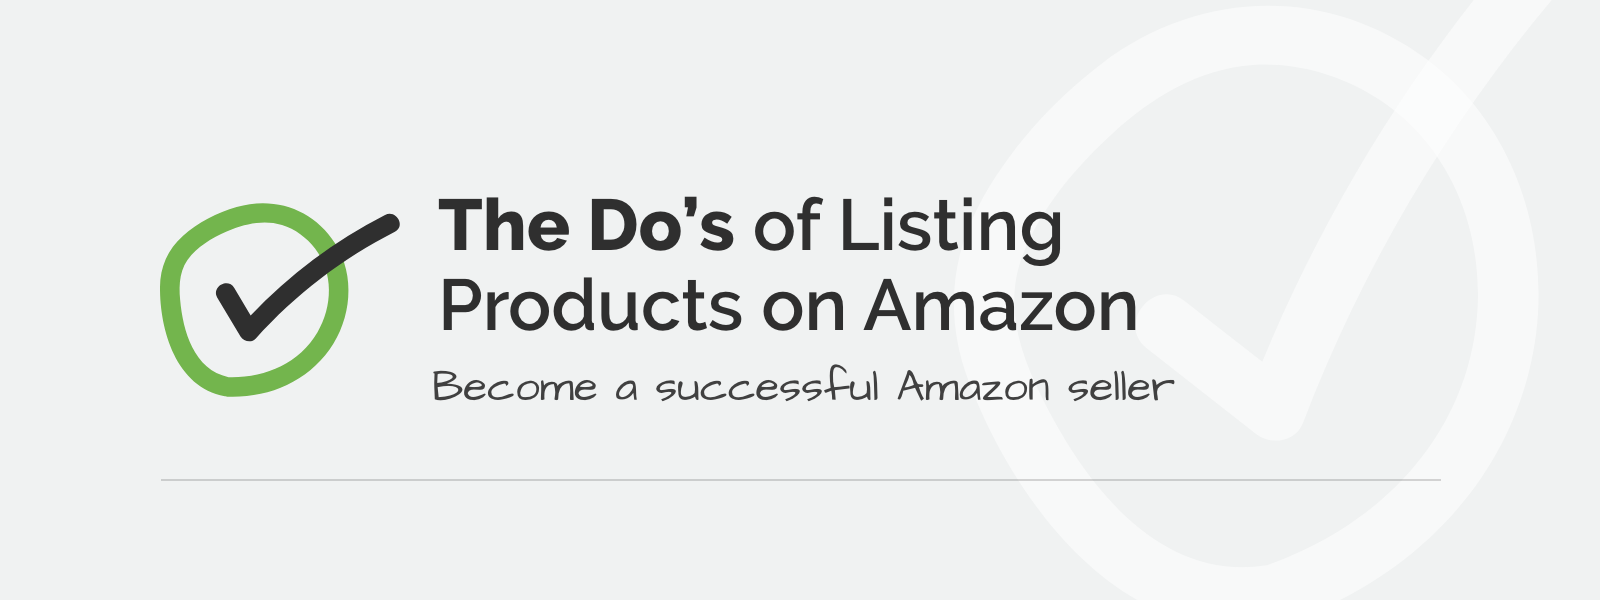 The Do's of Listing Products on Amazon